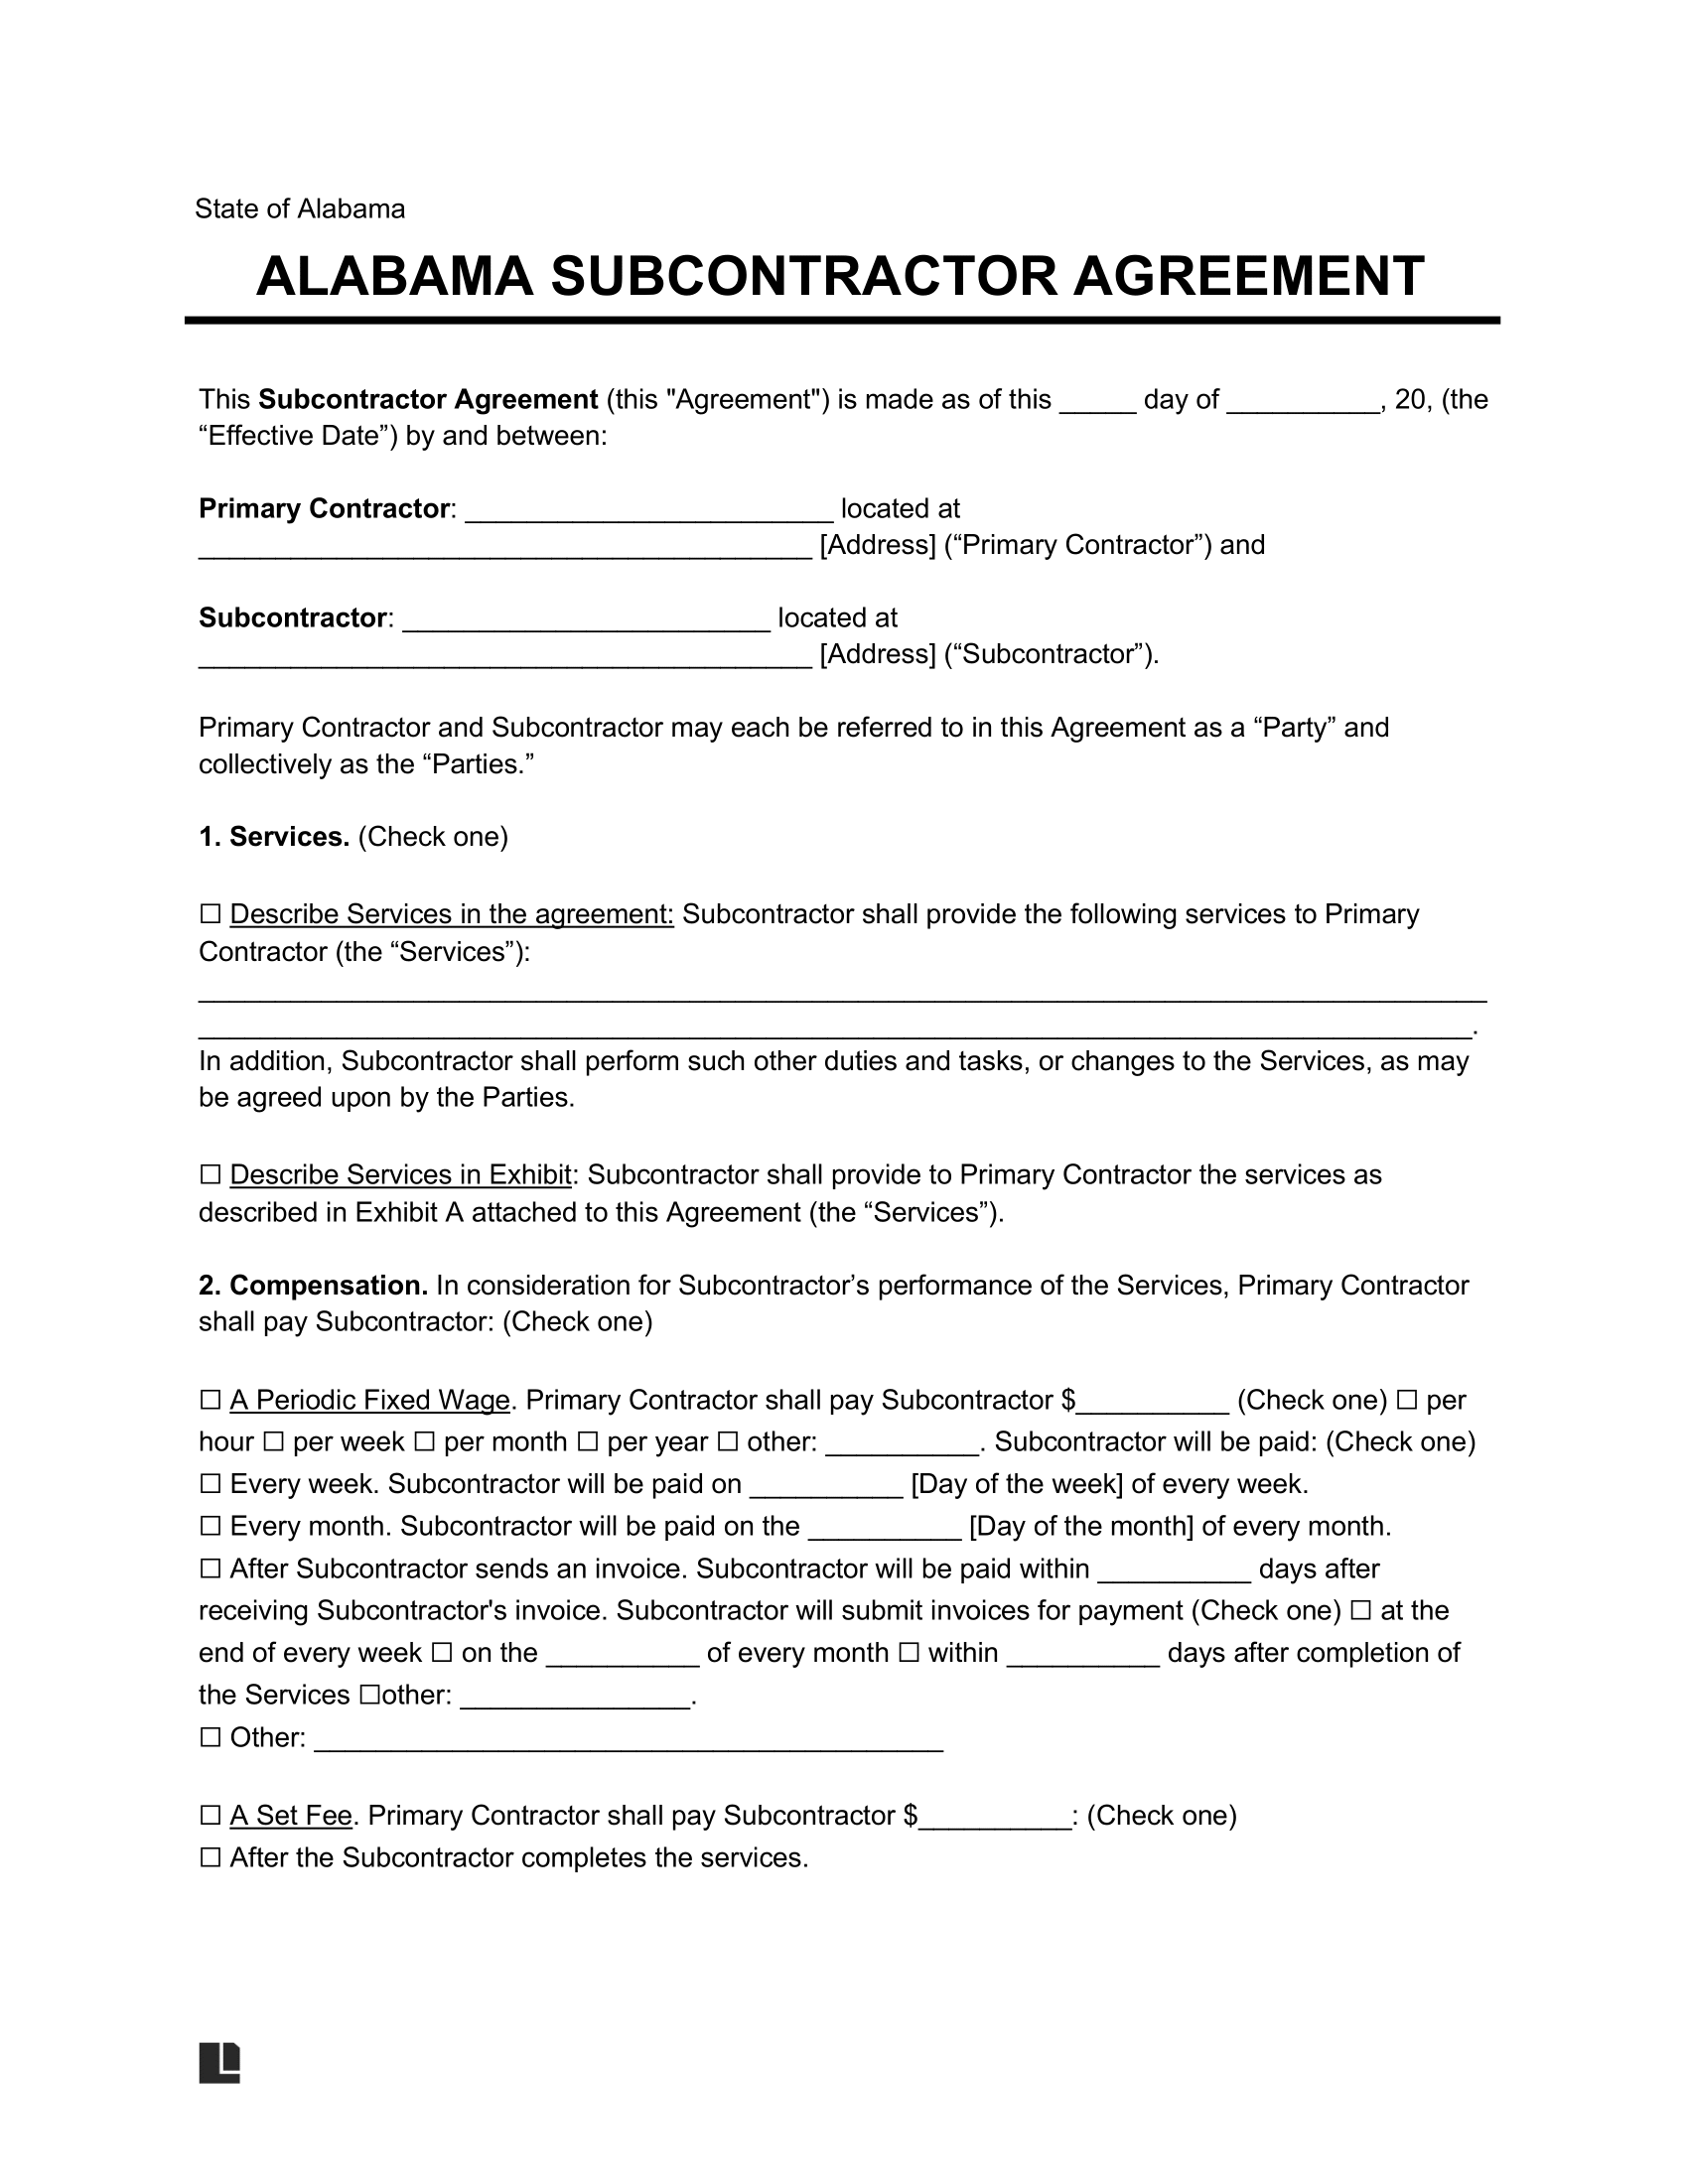 alabama subcontractor agreement template